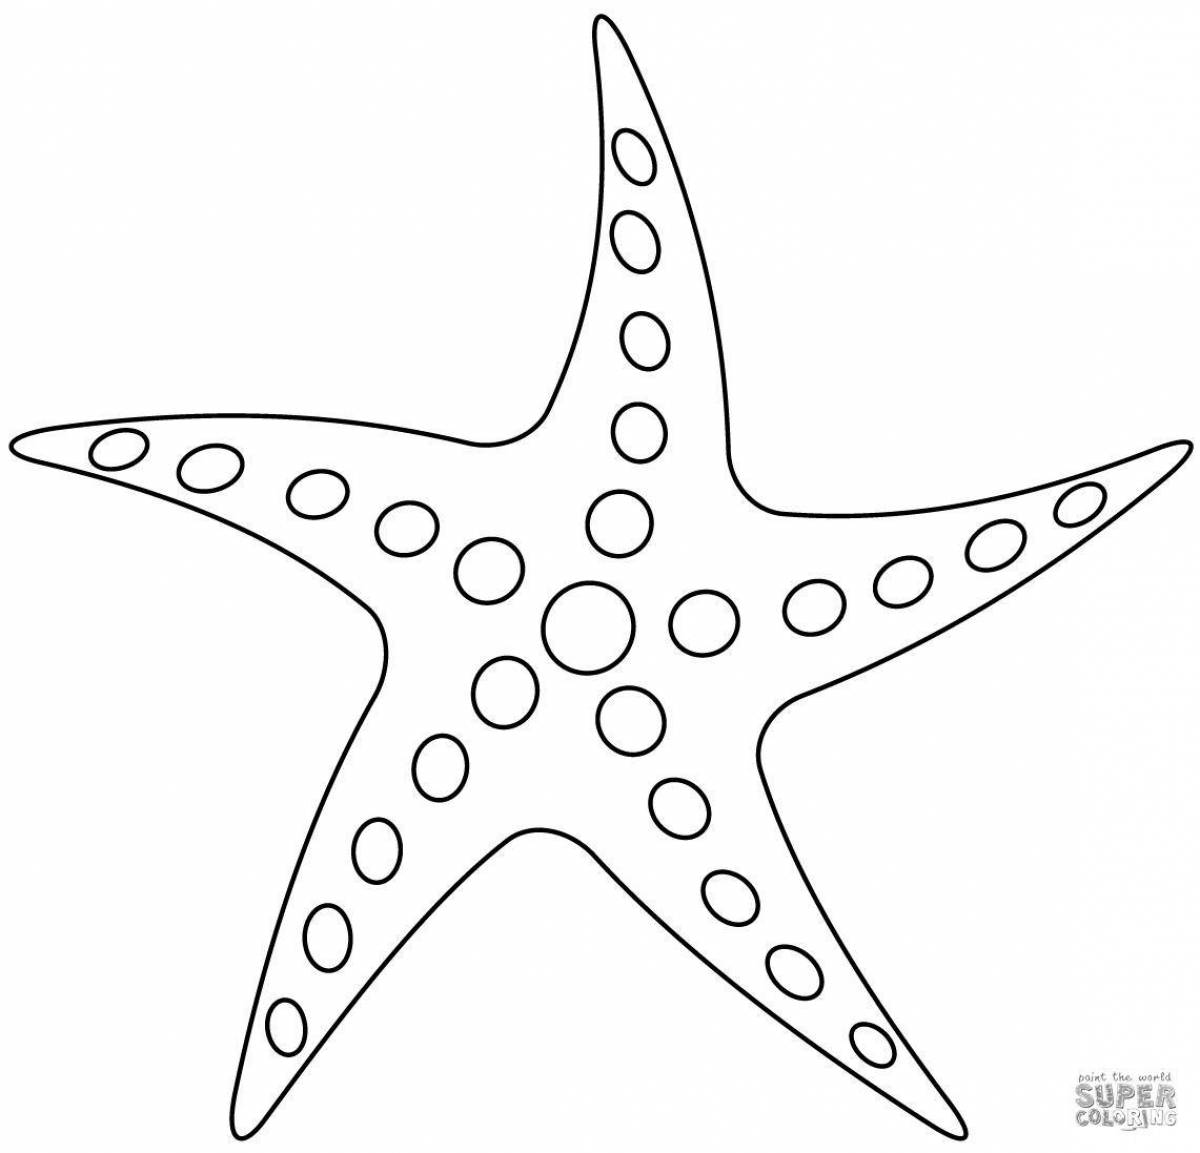 Gorgeous starfish coloring book for kids